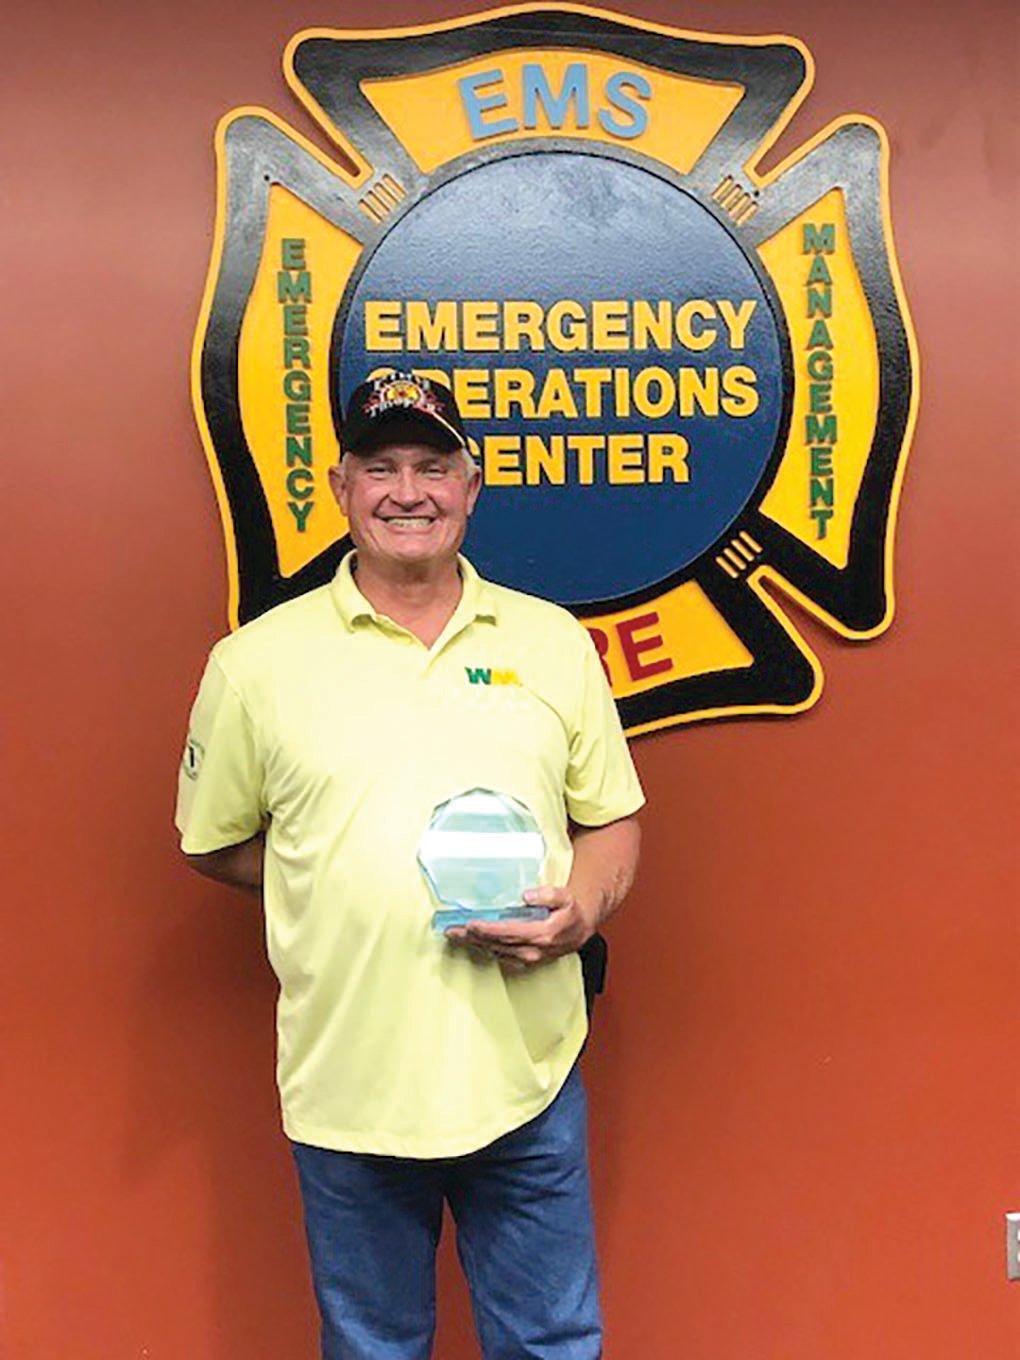 Glades County Public Safety congratulates Volunteer Fire Chief Jerry Watson for being named Glades County Volunteer Firefighter of the Year for 2021.